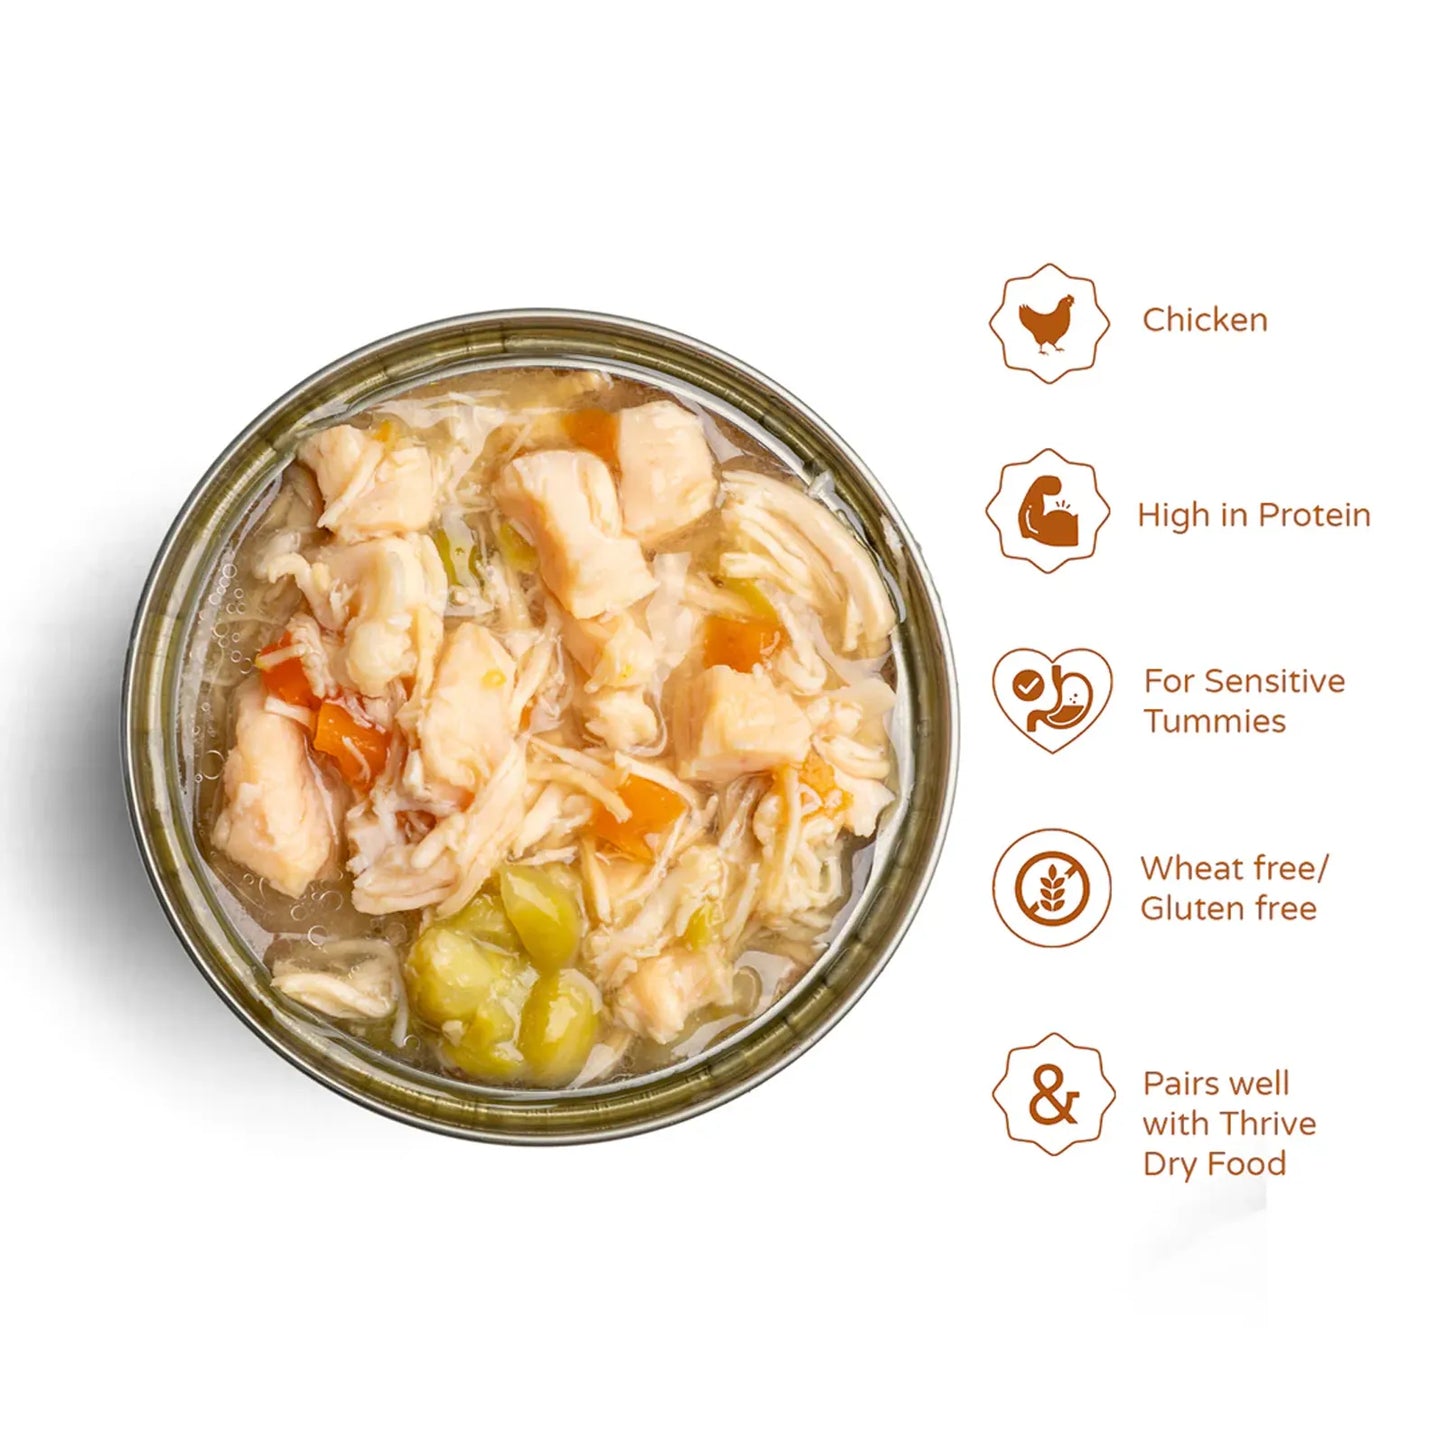 Thrive - COMPLETE 100% Chicken With Vegetable 75g